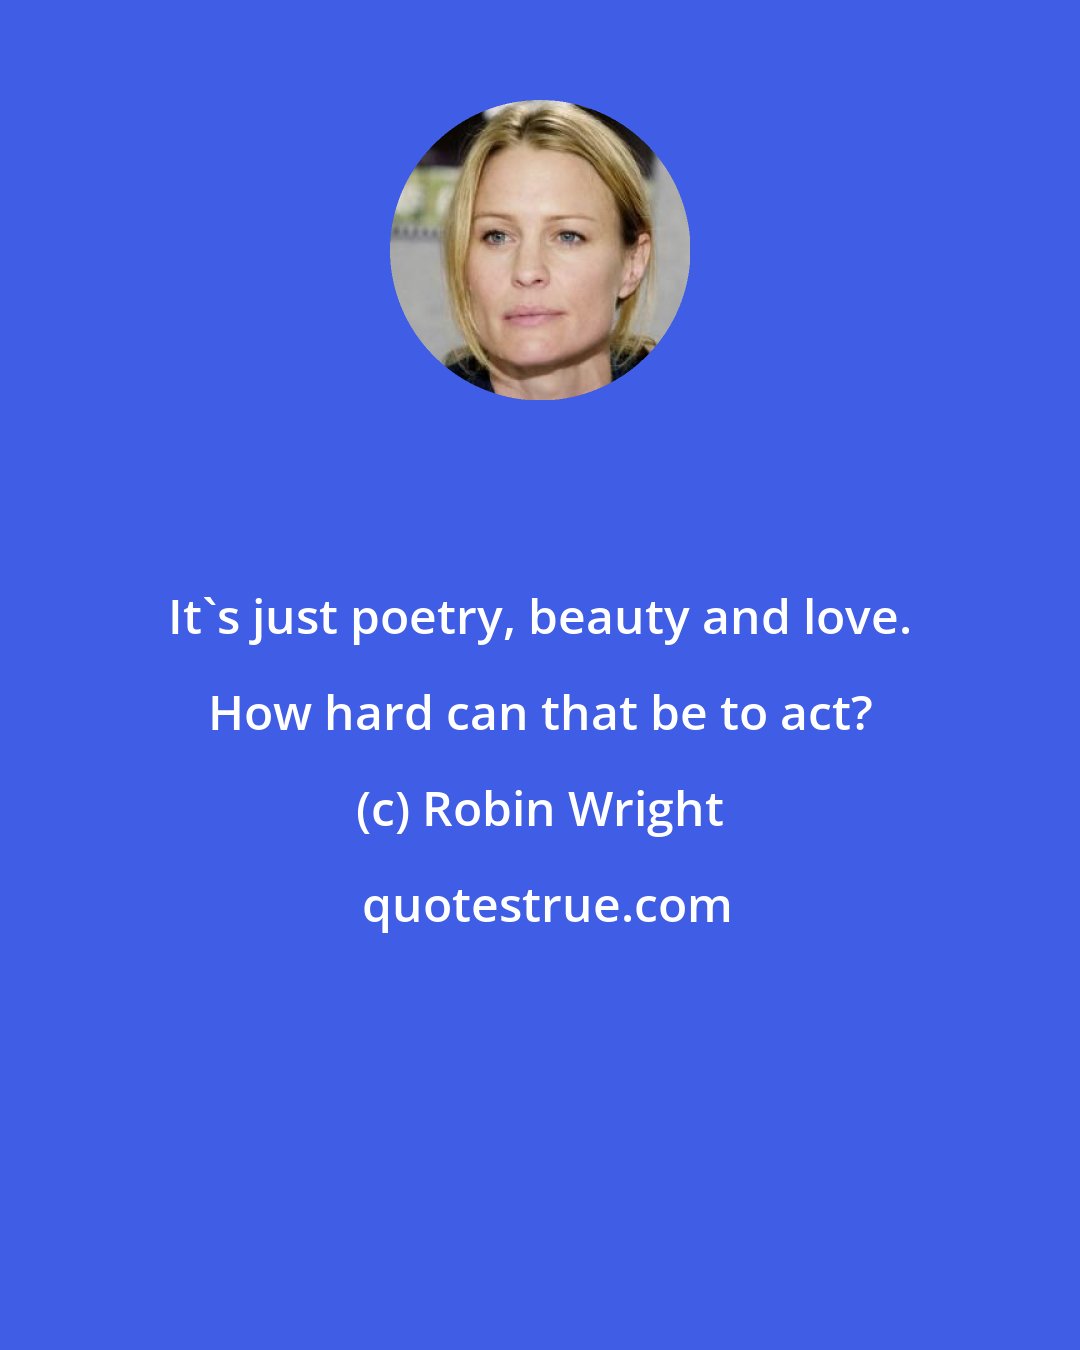 Robin Wright: It's just poetry, beauty and love. How hard can that be to act?